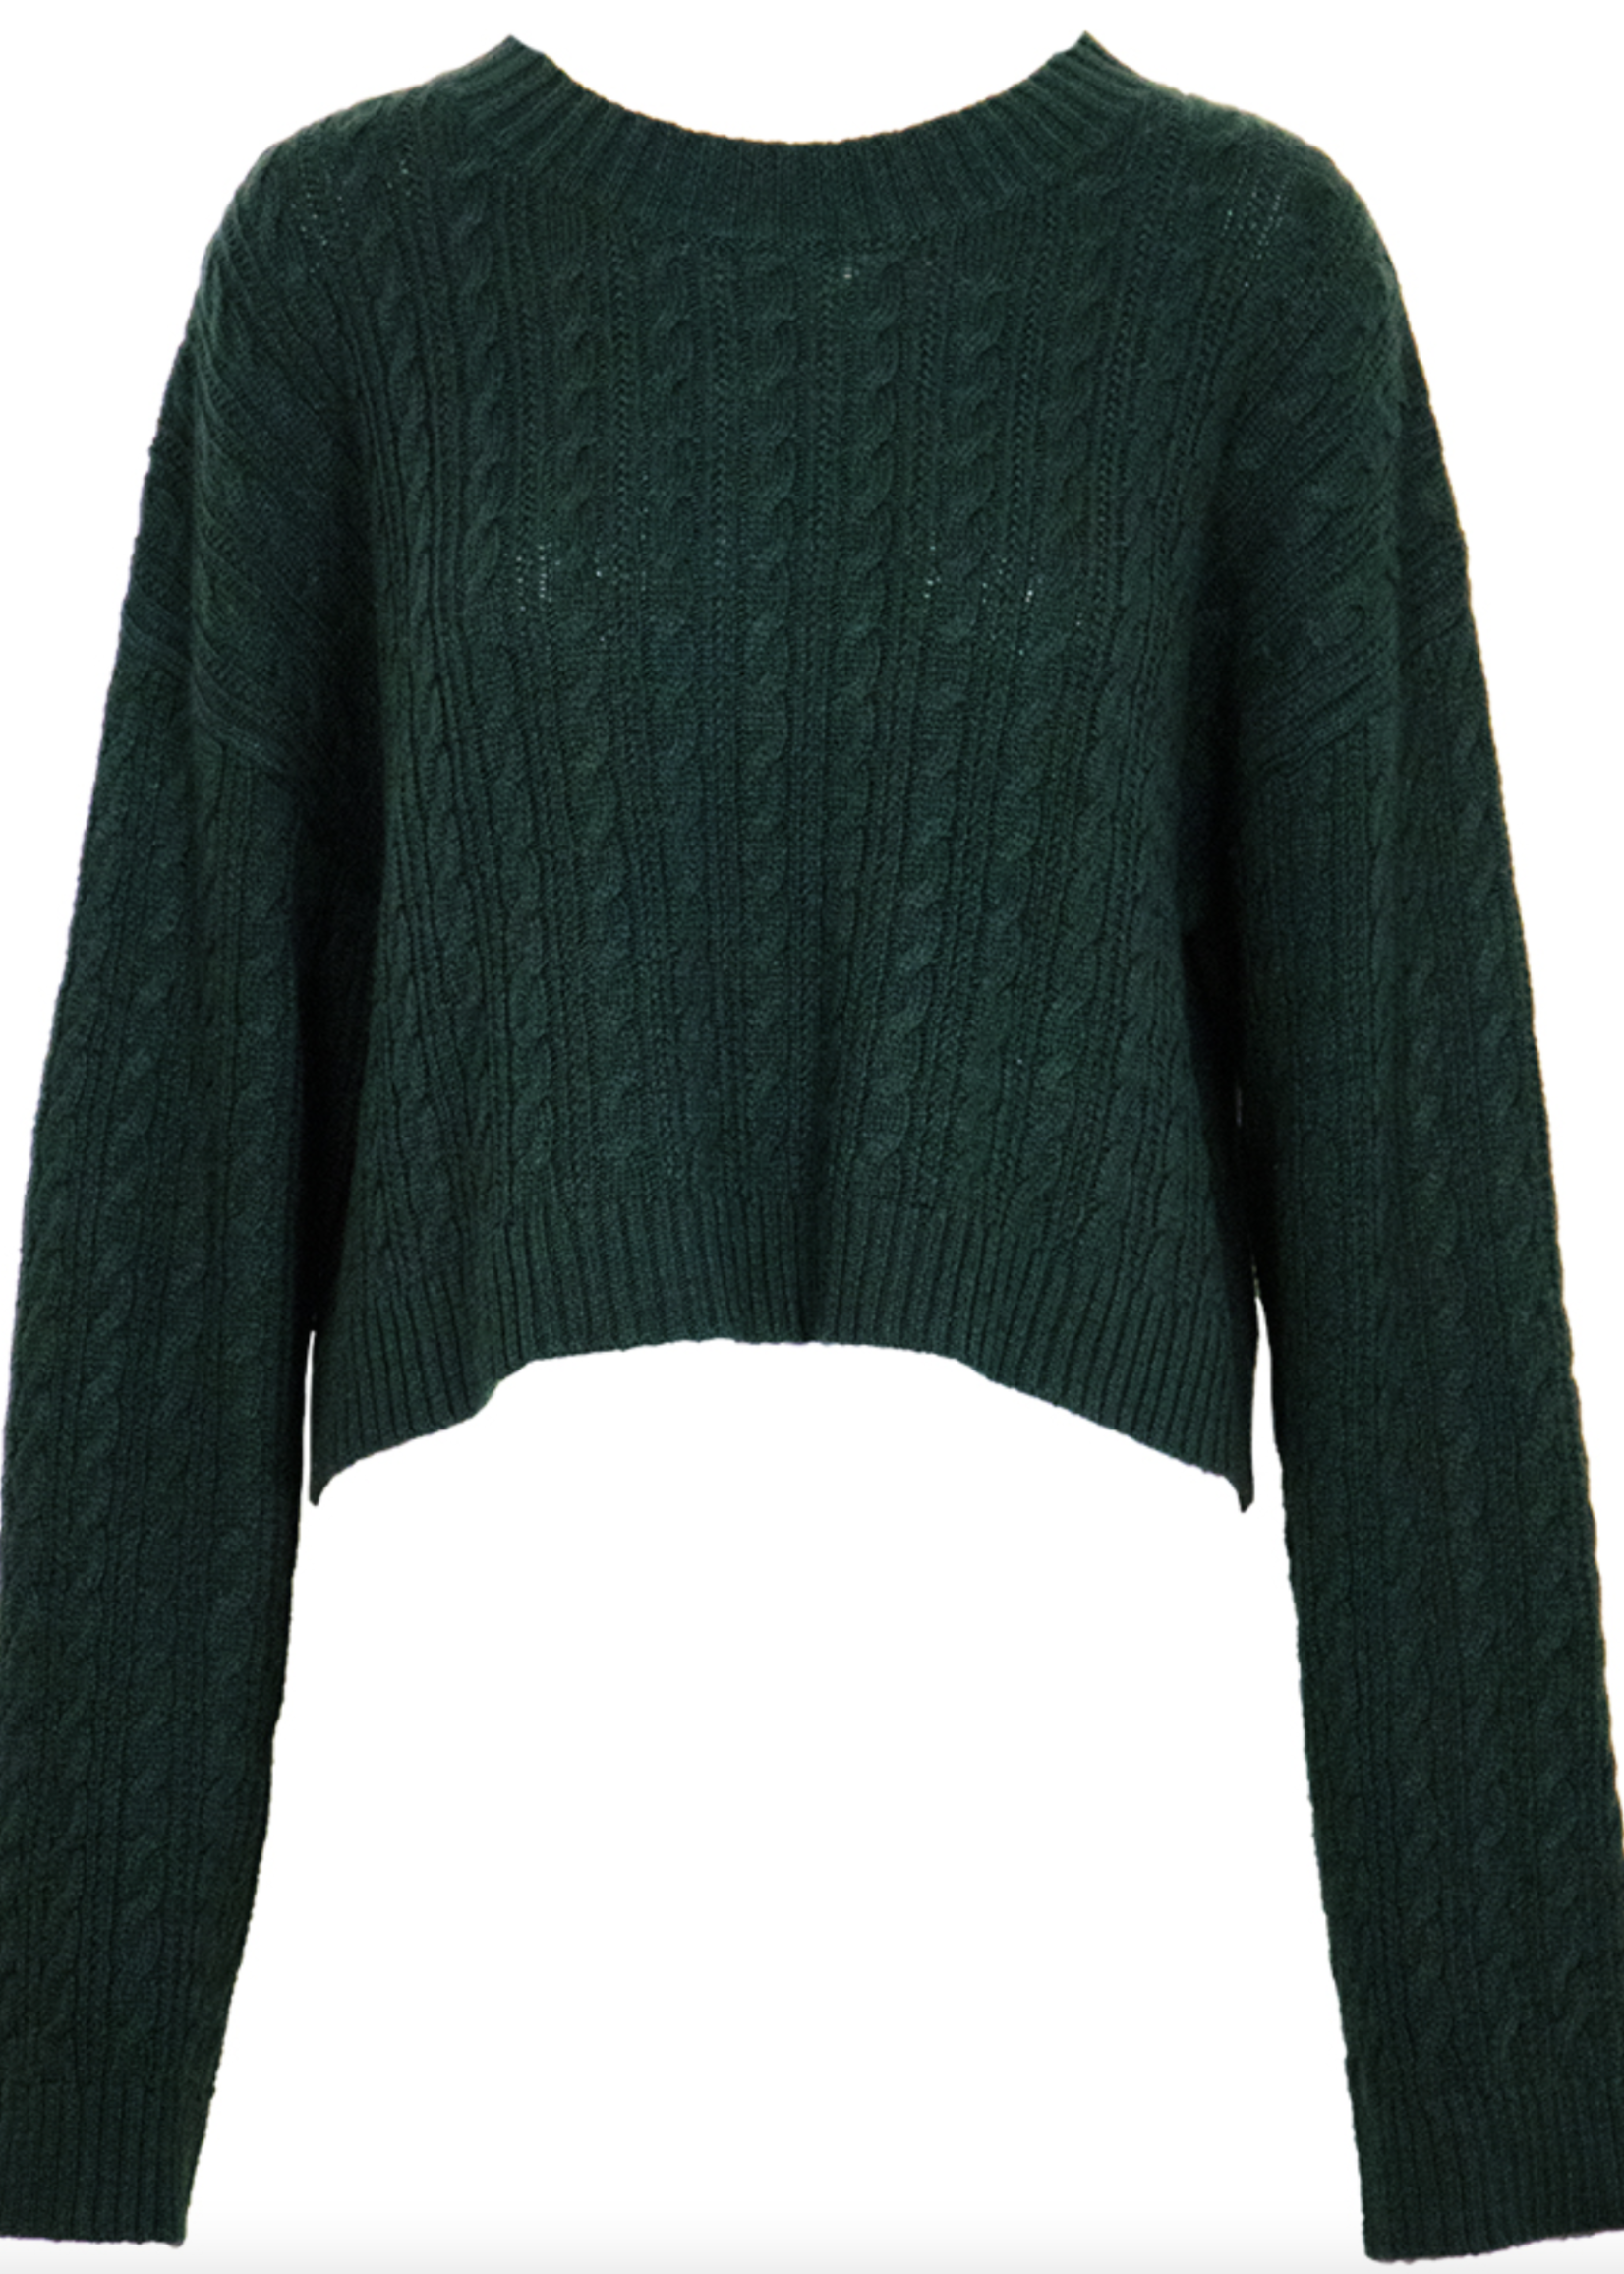 Lucy Paris SHAY CABLE KNIT SWEATER